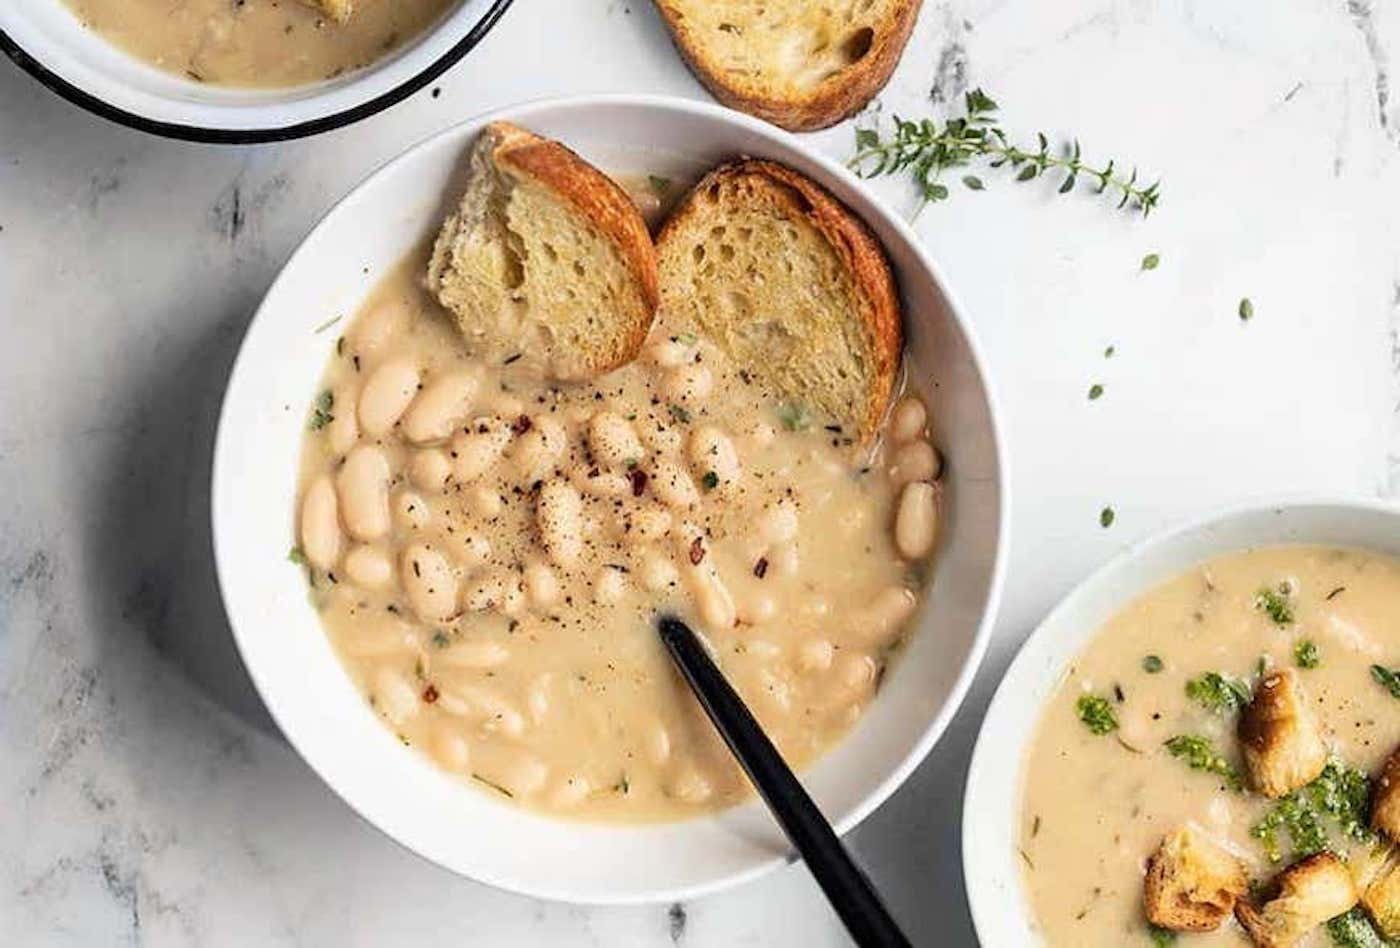 White Bean Recipes That Even People Who ‘Don’t Like Beans’ Will Love